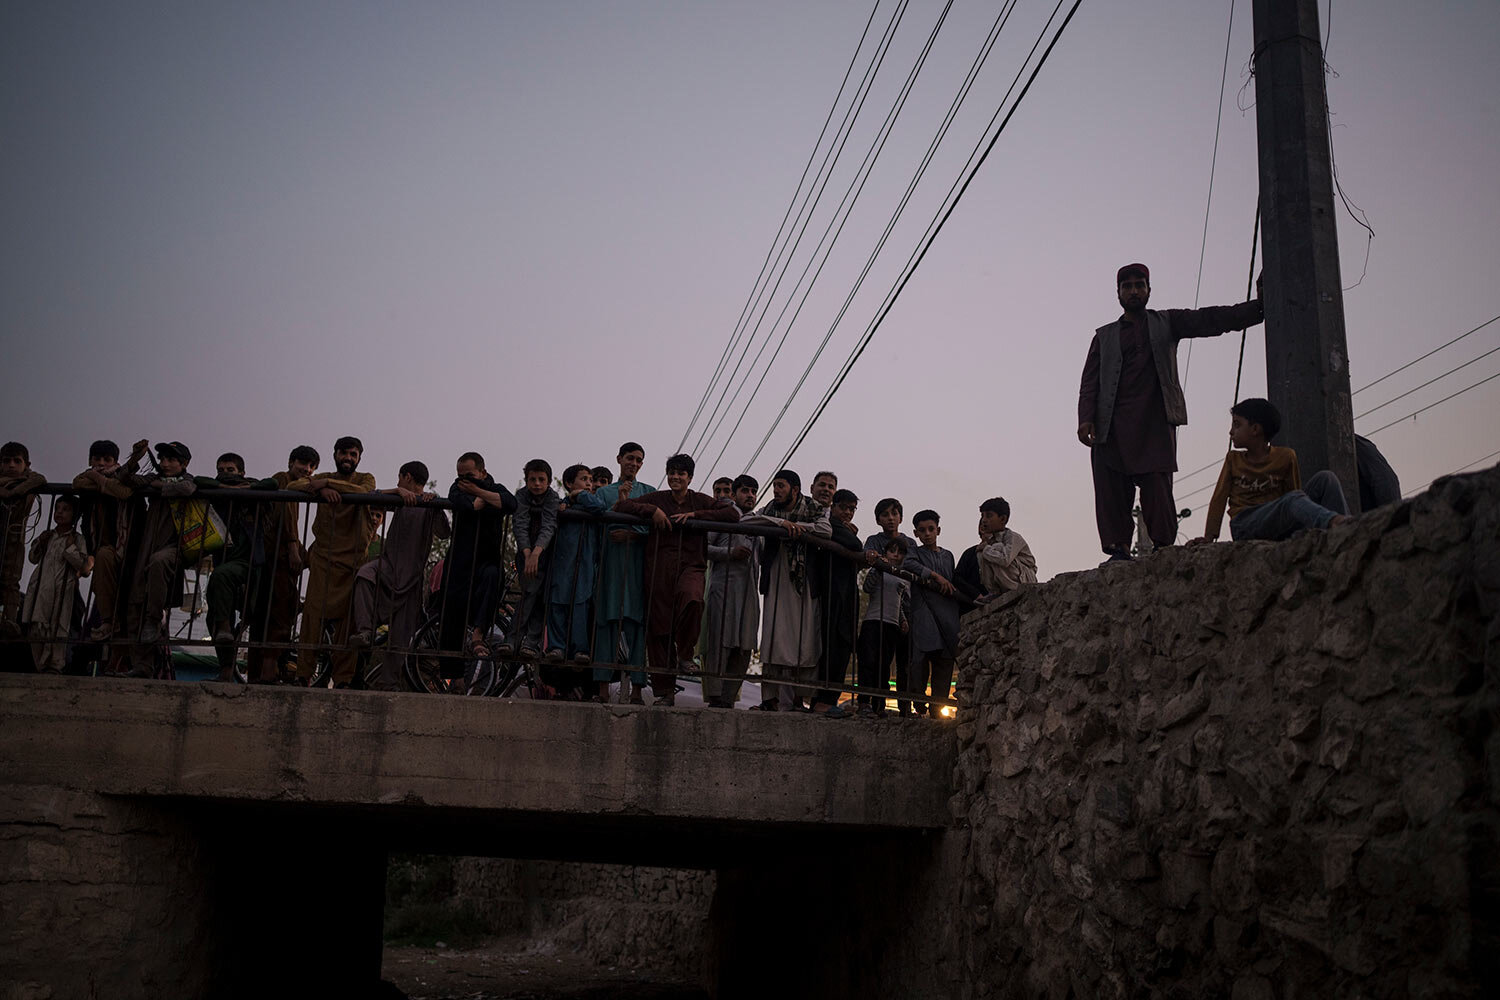  Afghans gather to watch Taliban fighters detaining drug users during a police operation in Kabul, Afghanistan, Friday, Oct. 1, 2021. (AP Photo/Felipe Dana)  